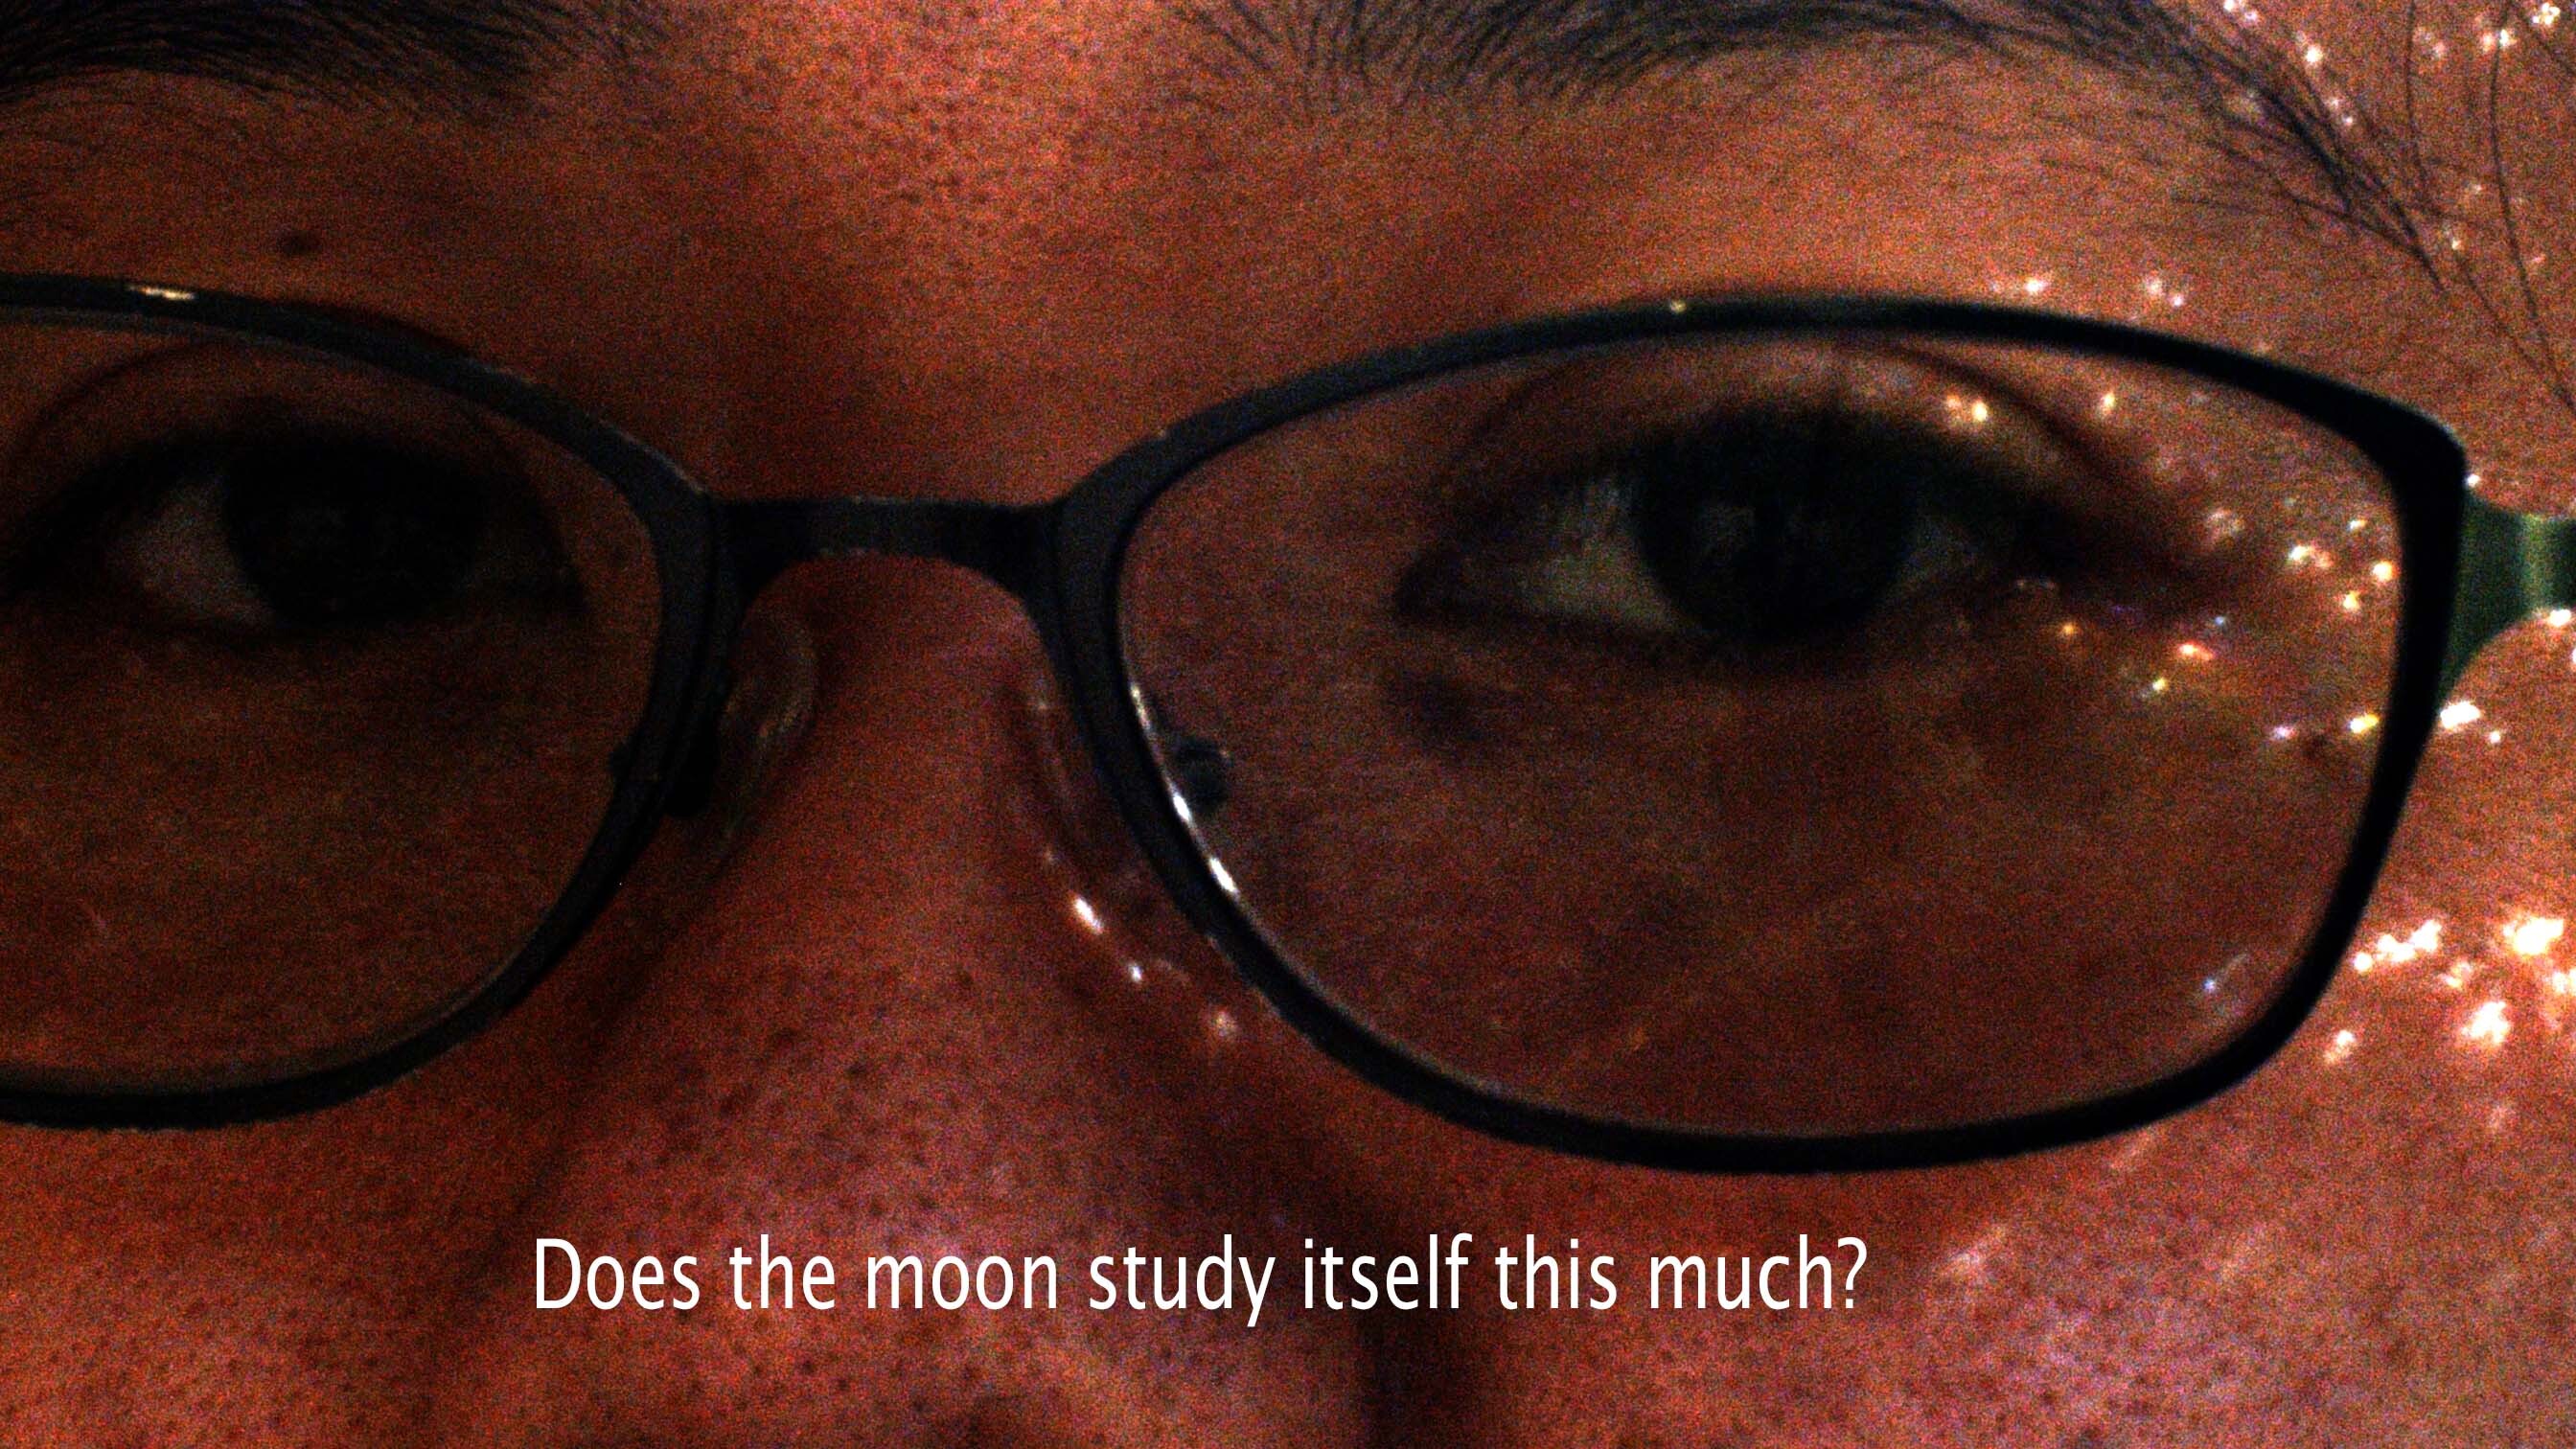 renee eyes behind glasses with caption reading: Does the moon study itself this much?